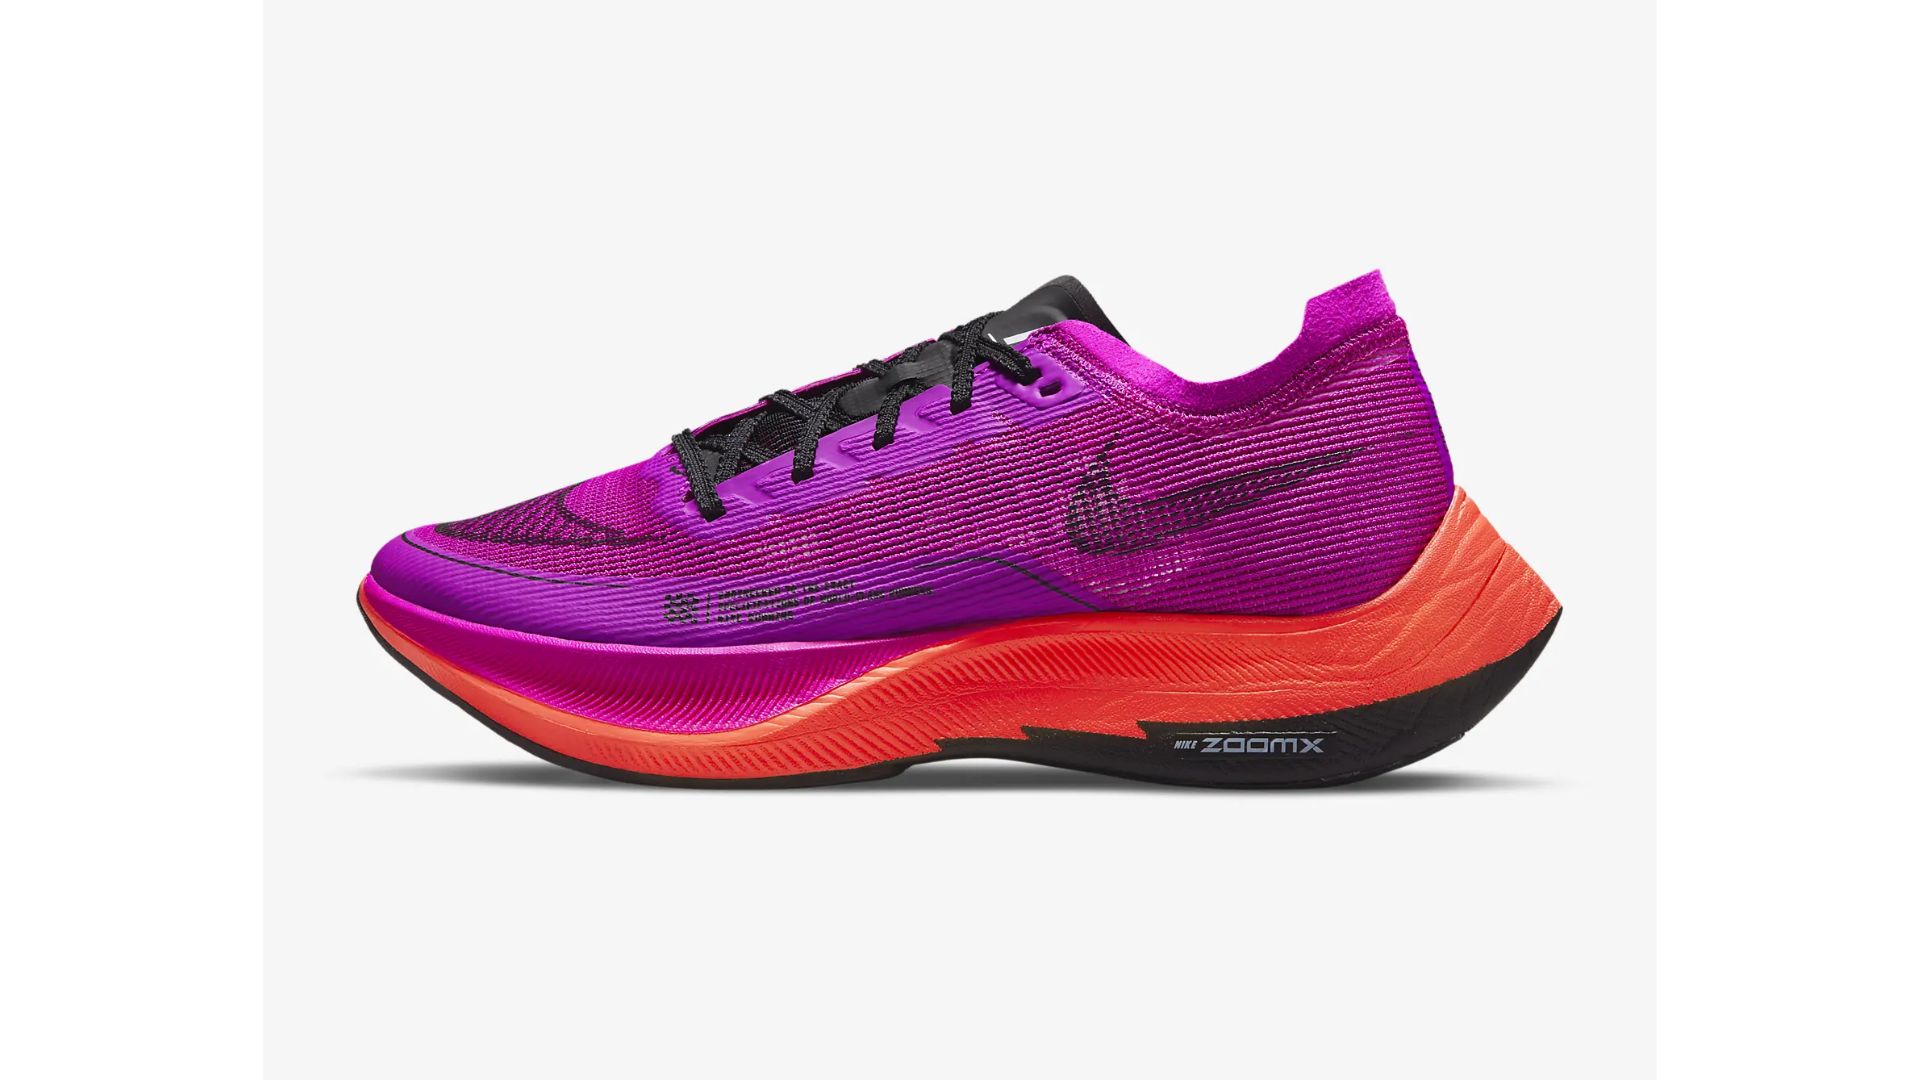 Nike ZoomX Vaporfly Next% 2 in bright pink with orange sole